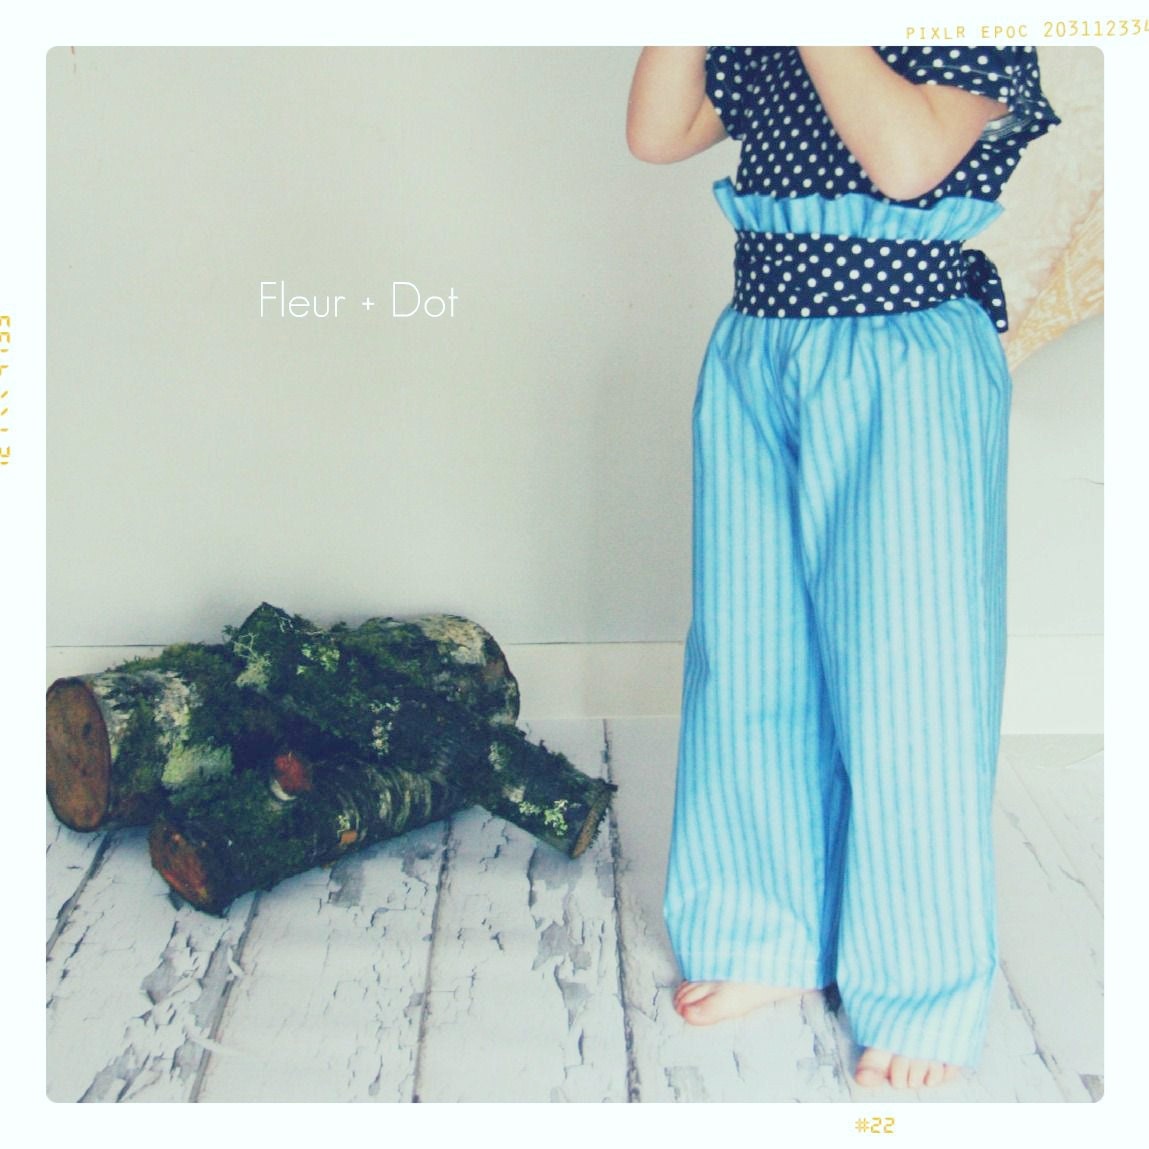 Girls Pants: The Blue Striped Ruffle Top Wide Leg Trousers from the Autumn Winter Collection by Fleur and Dot - FleurandDot